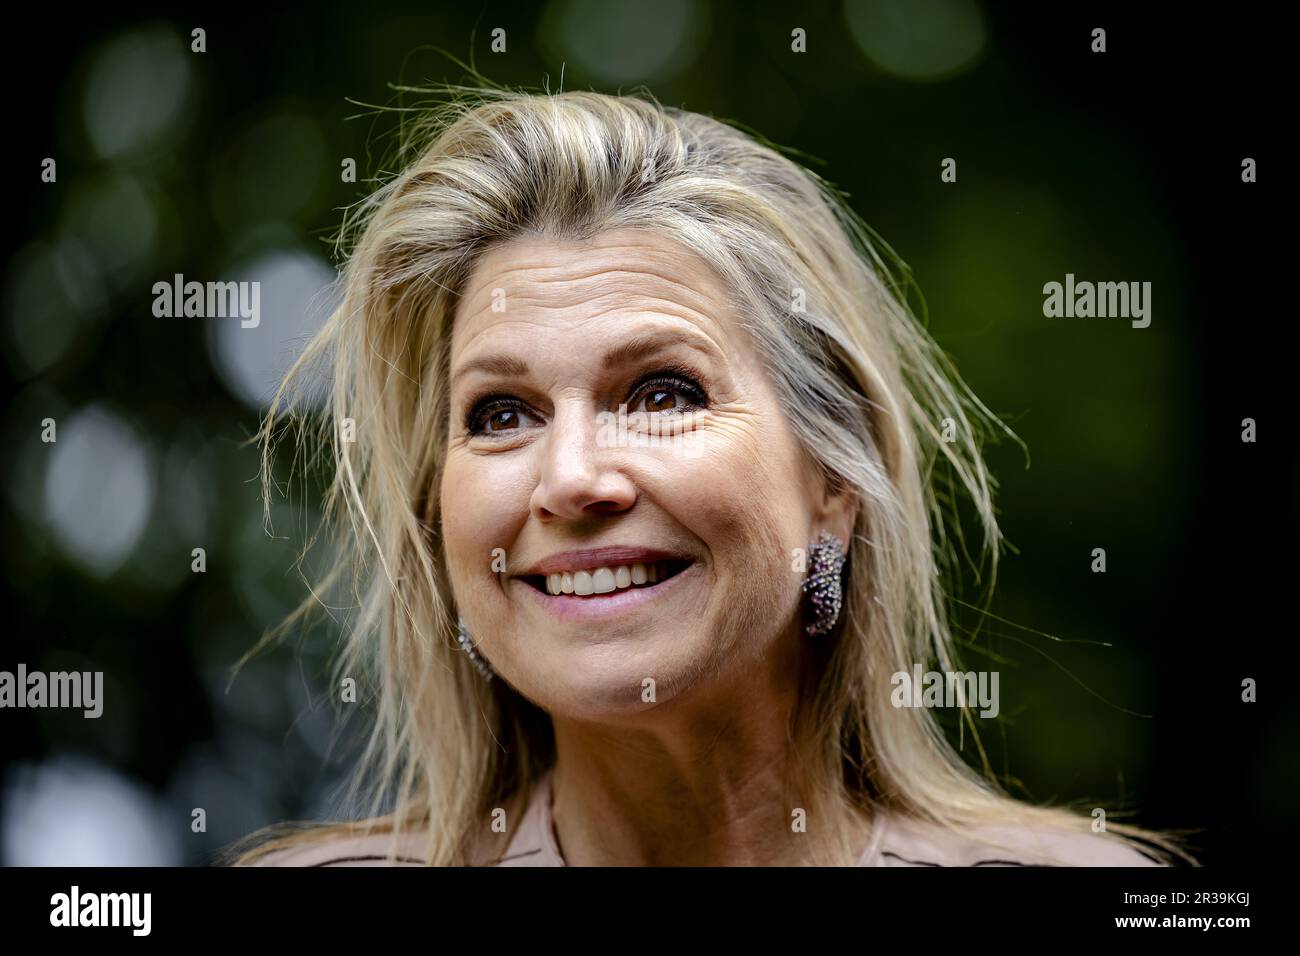 AUSTERLITZ - Queen Maxima arrives at Dorpshuis Austerlitz for a meeting about appropriate care. During the working visit, the Queen will talk about, among other things, the cooperation between formal and informal care. ANP ROBIN VAN LONKHUIJSEN netherlands out - belgium out Stock Photo